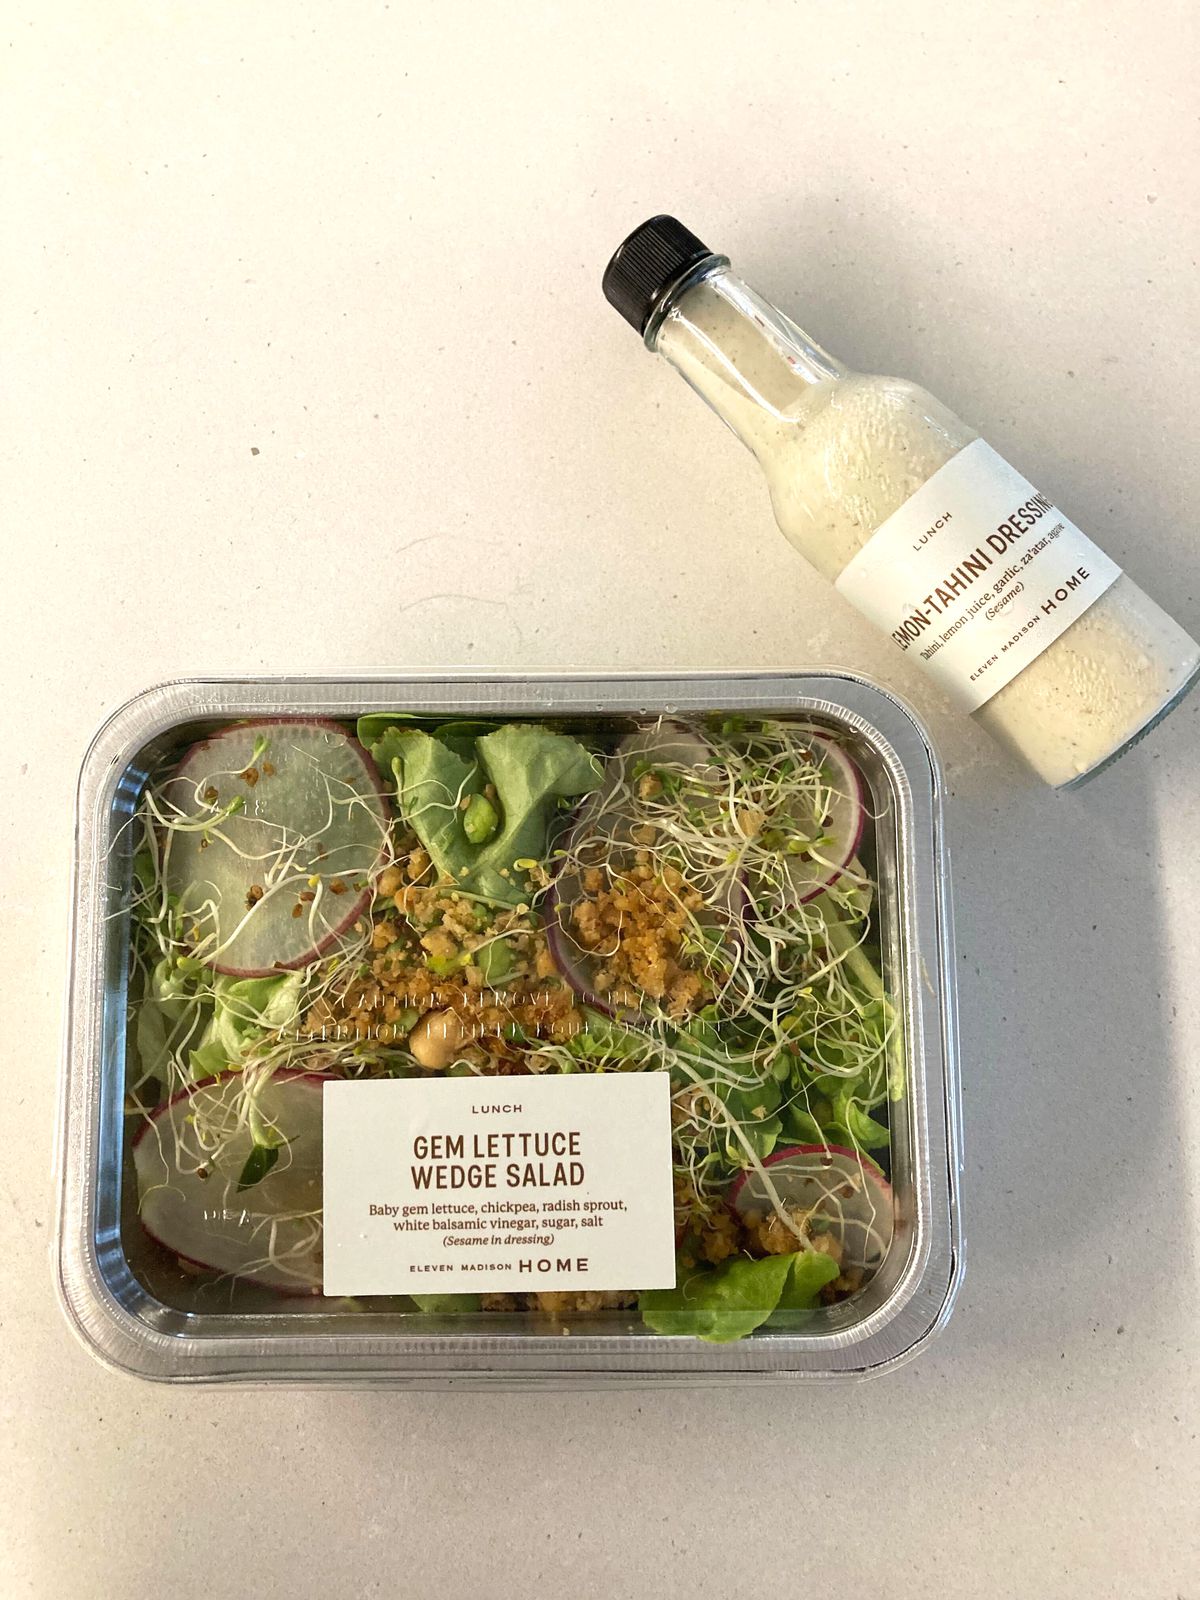 Salad in an aluminum takeout container next to a small bottle of salad dressing.